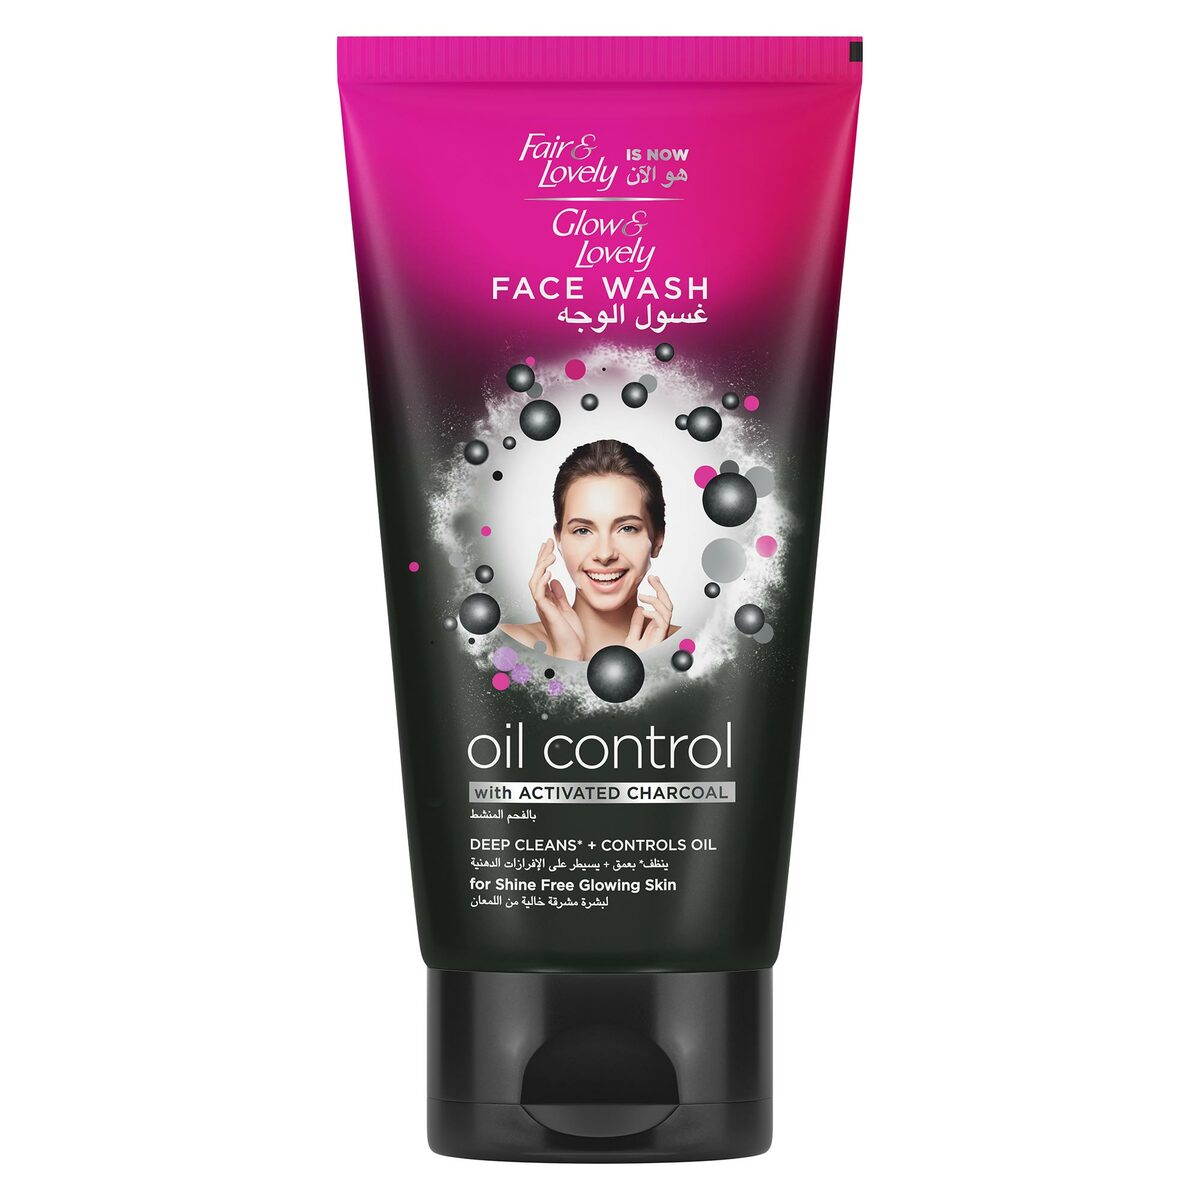 Glow & Lovely Face Wash Oil Control 150 g